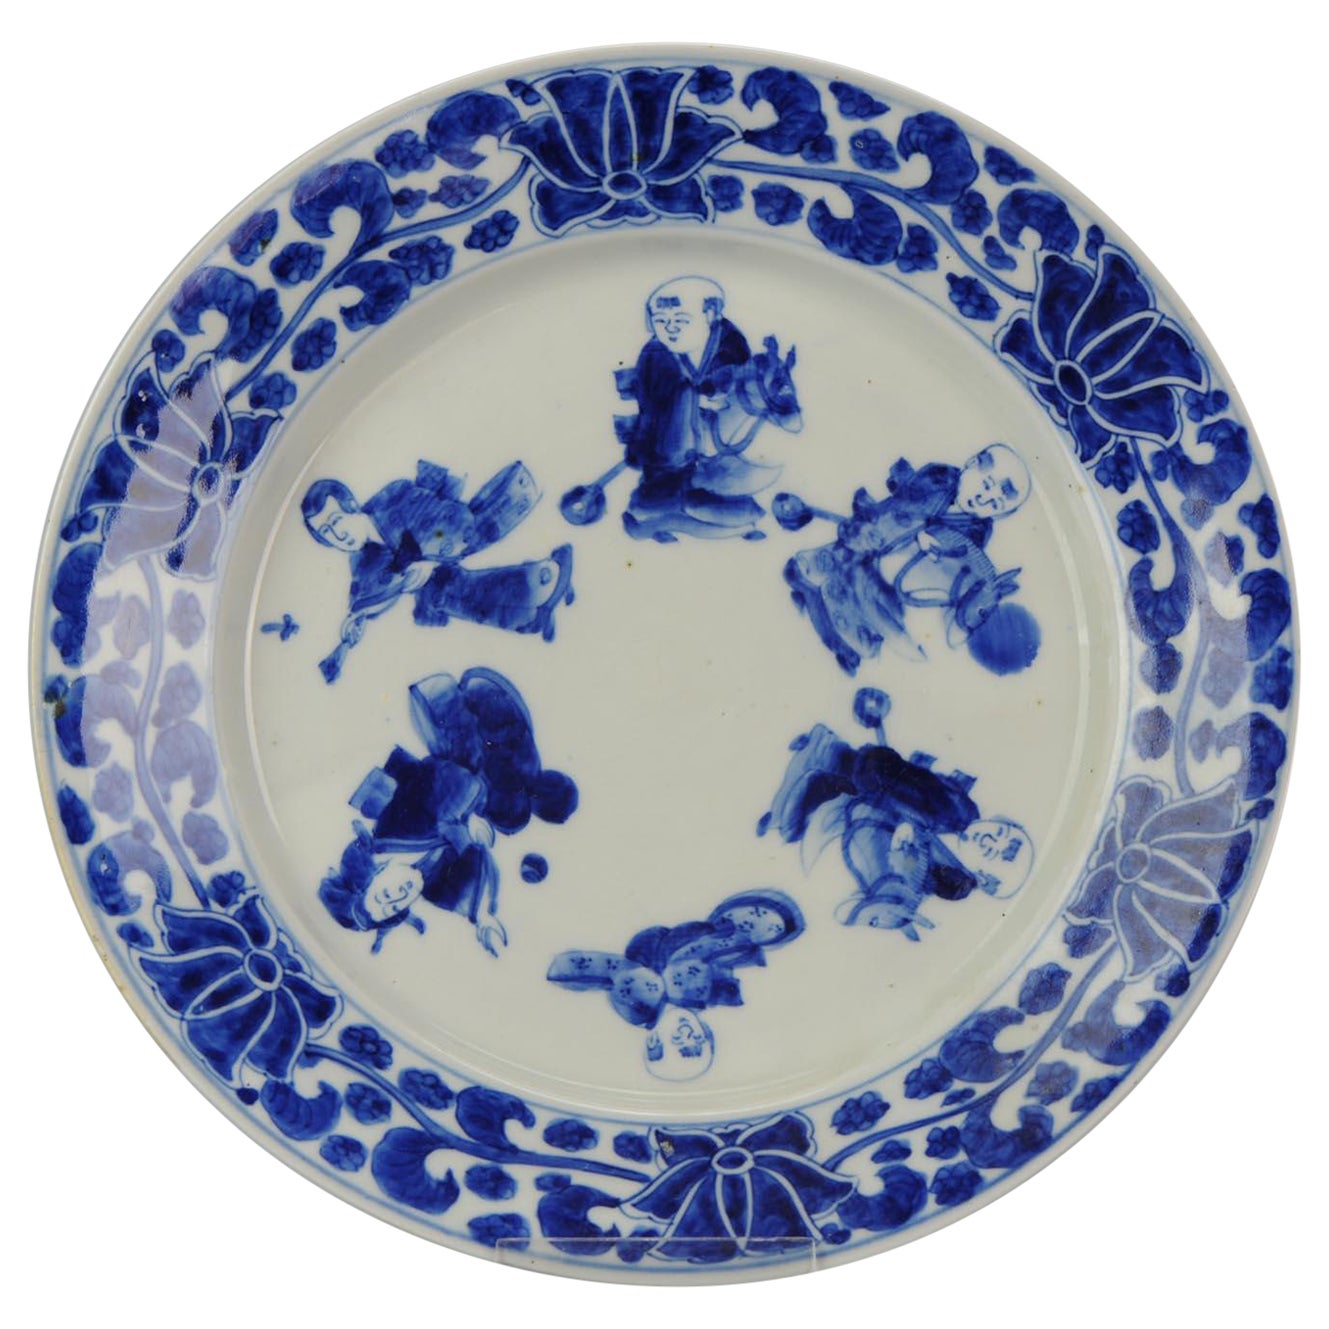 Very Good Japanese Sometsuke Arita Arita Plate with Toy Horse Figures, 19th Cen For Sale